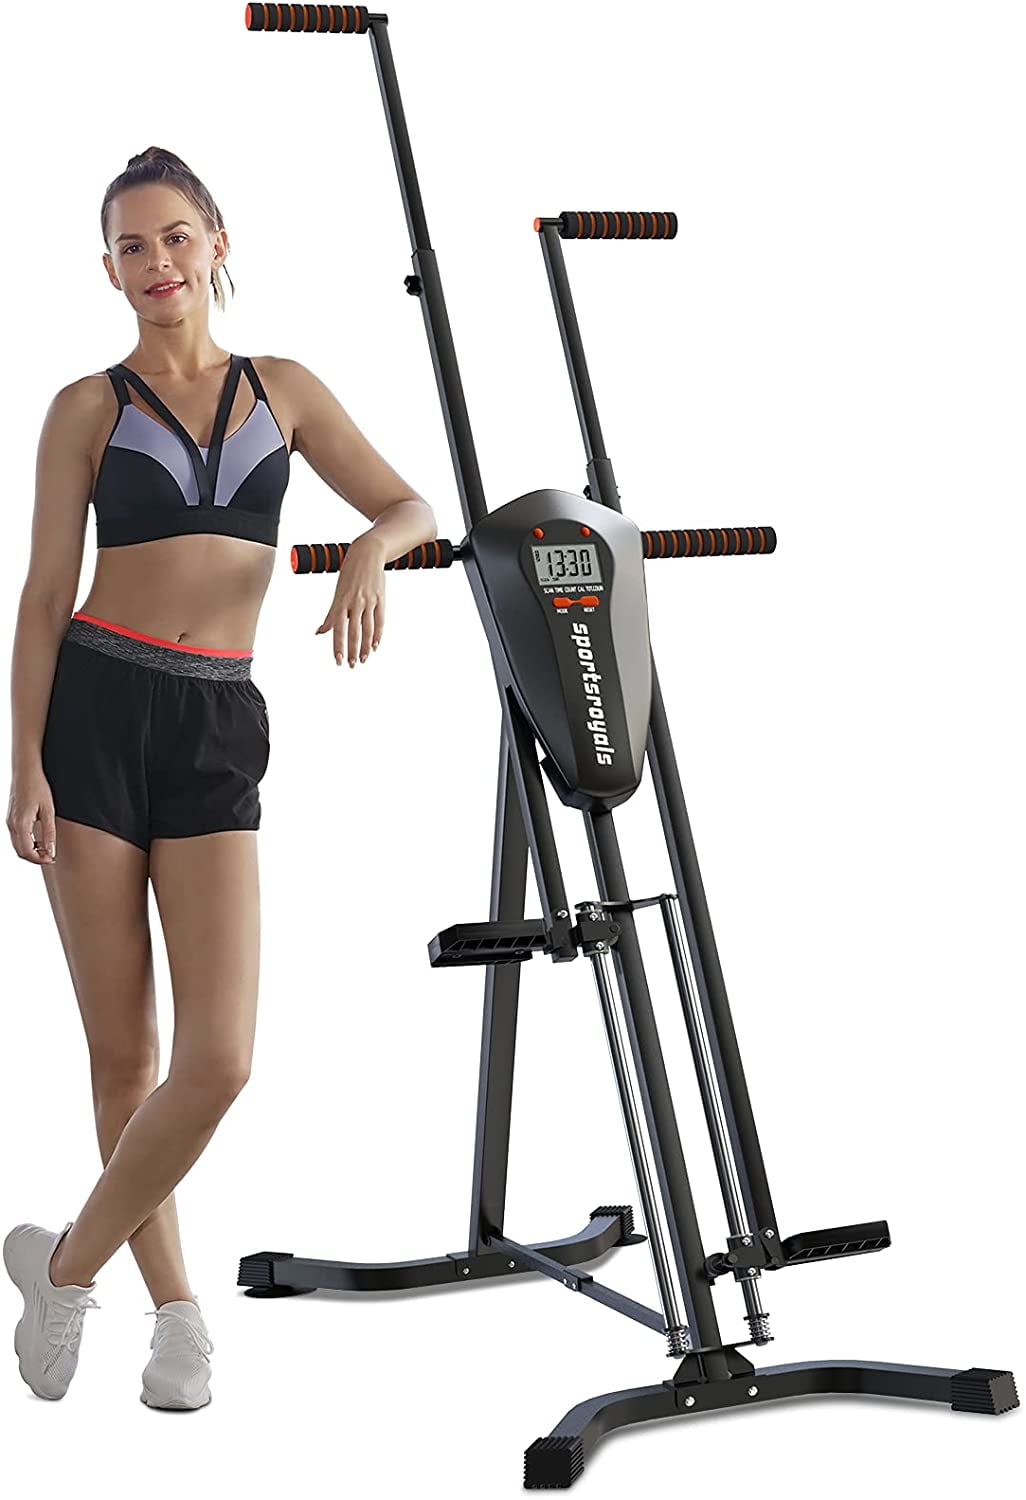 Vertical Climber Machine Exercise Stepper Maxi Cardio Workout Fitness Gym 